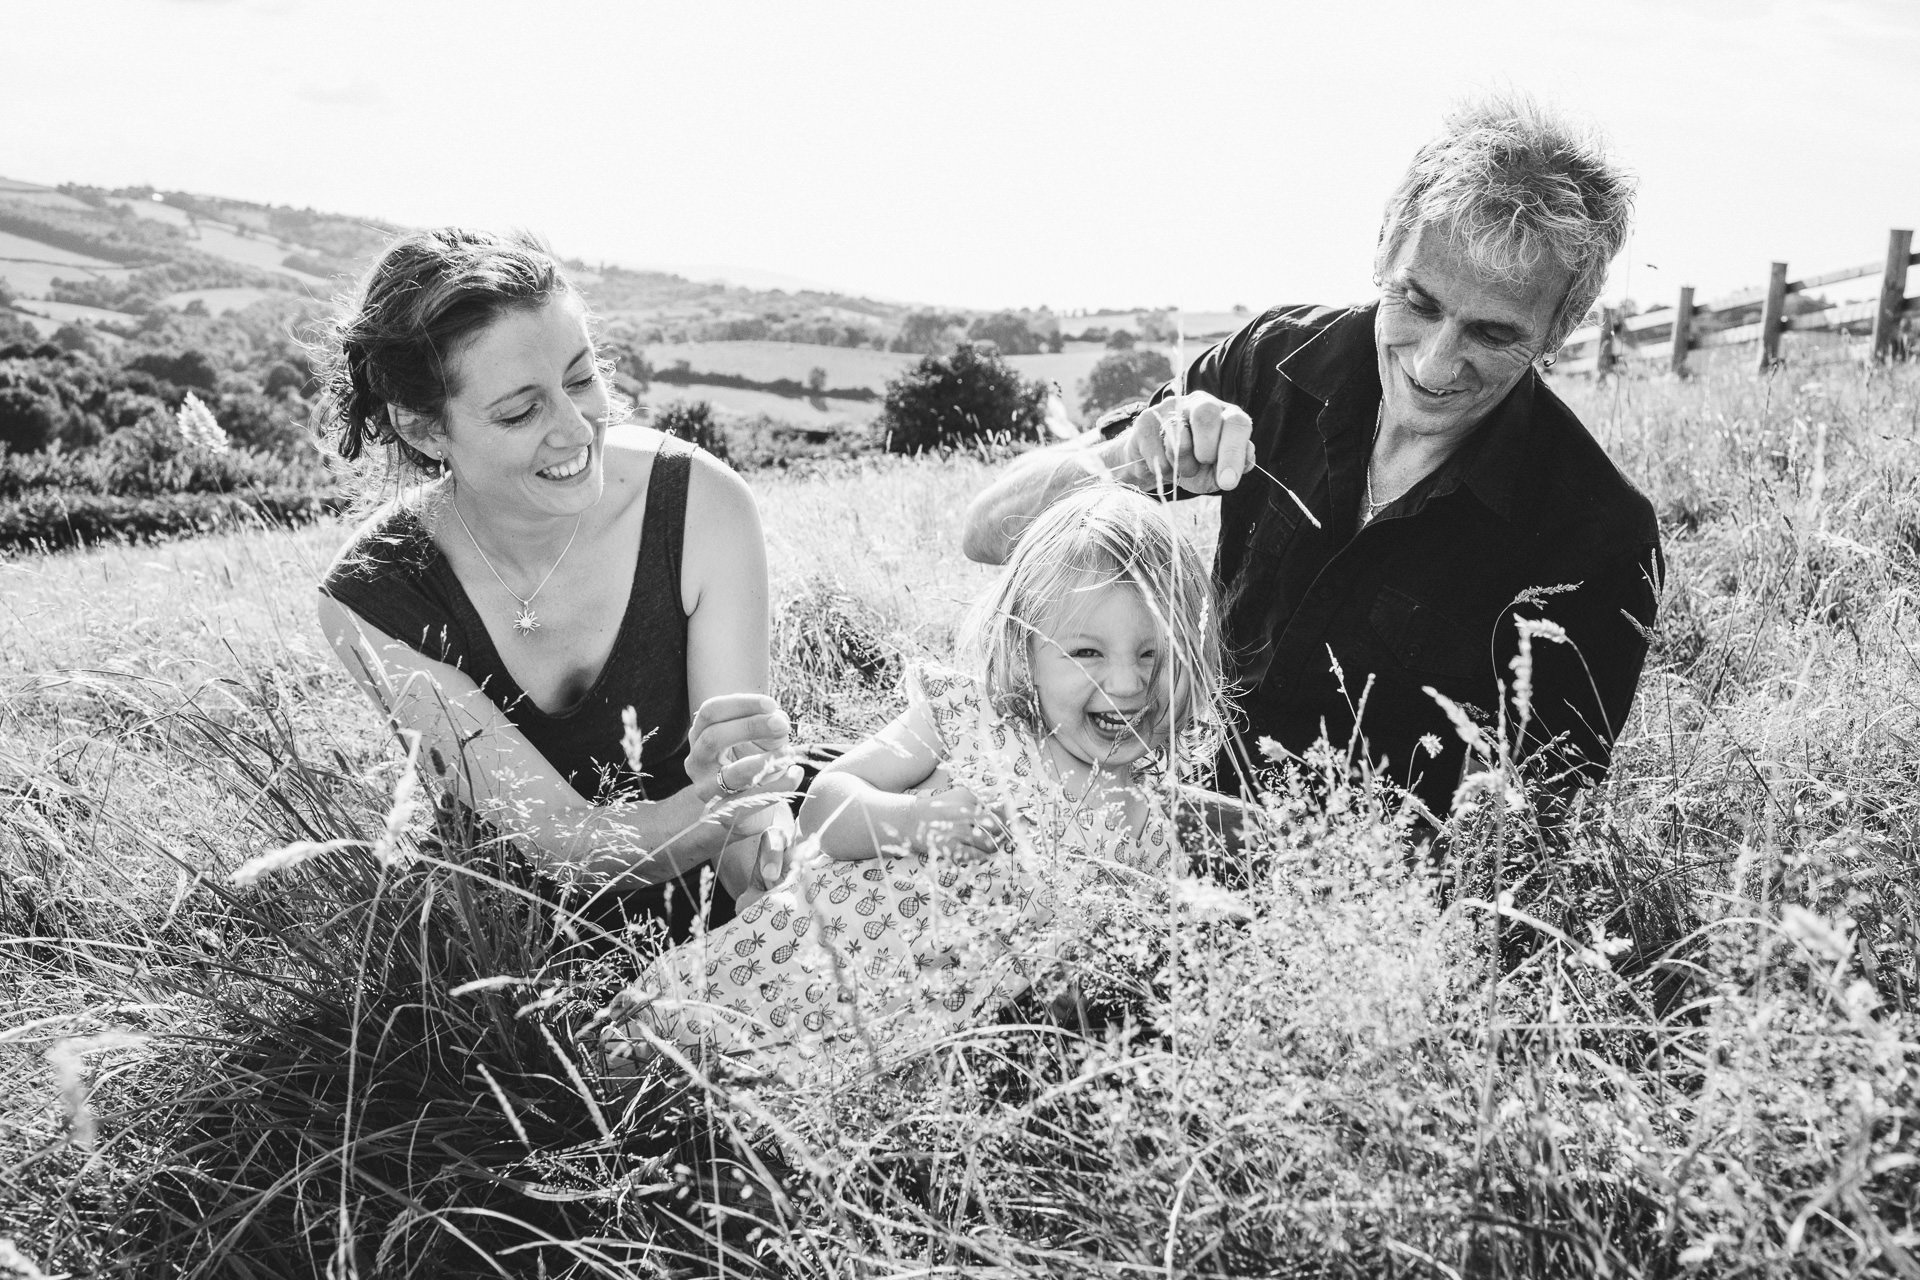 Two parents with a young daughter cuddling together in a field